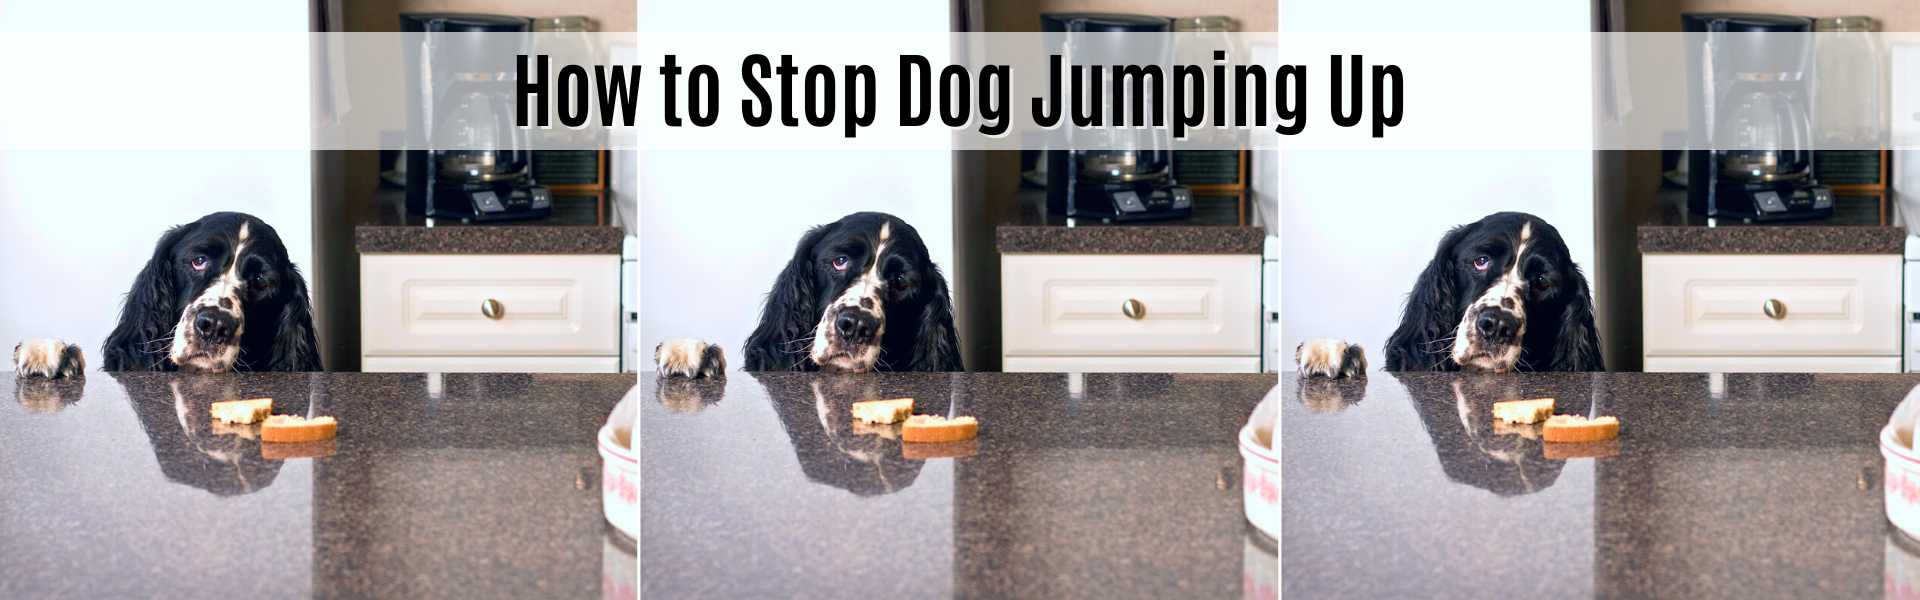 how to stop dog jumping up